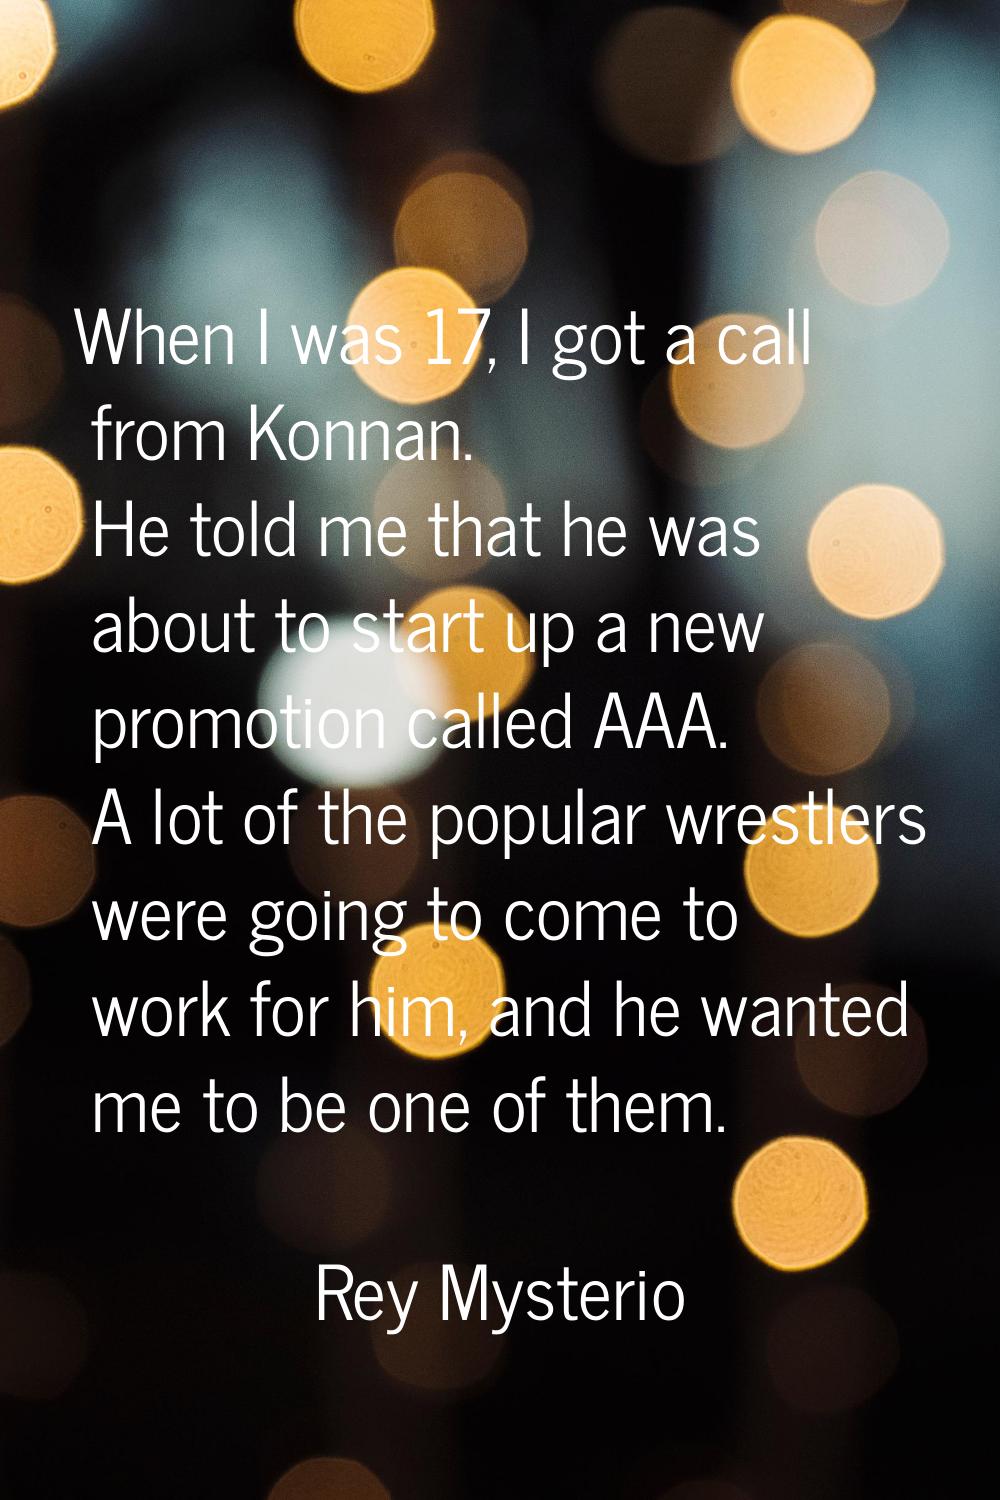 When I was 17, I got a call from Konnan. He told me that he was about to start up a new promotion c